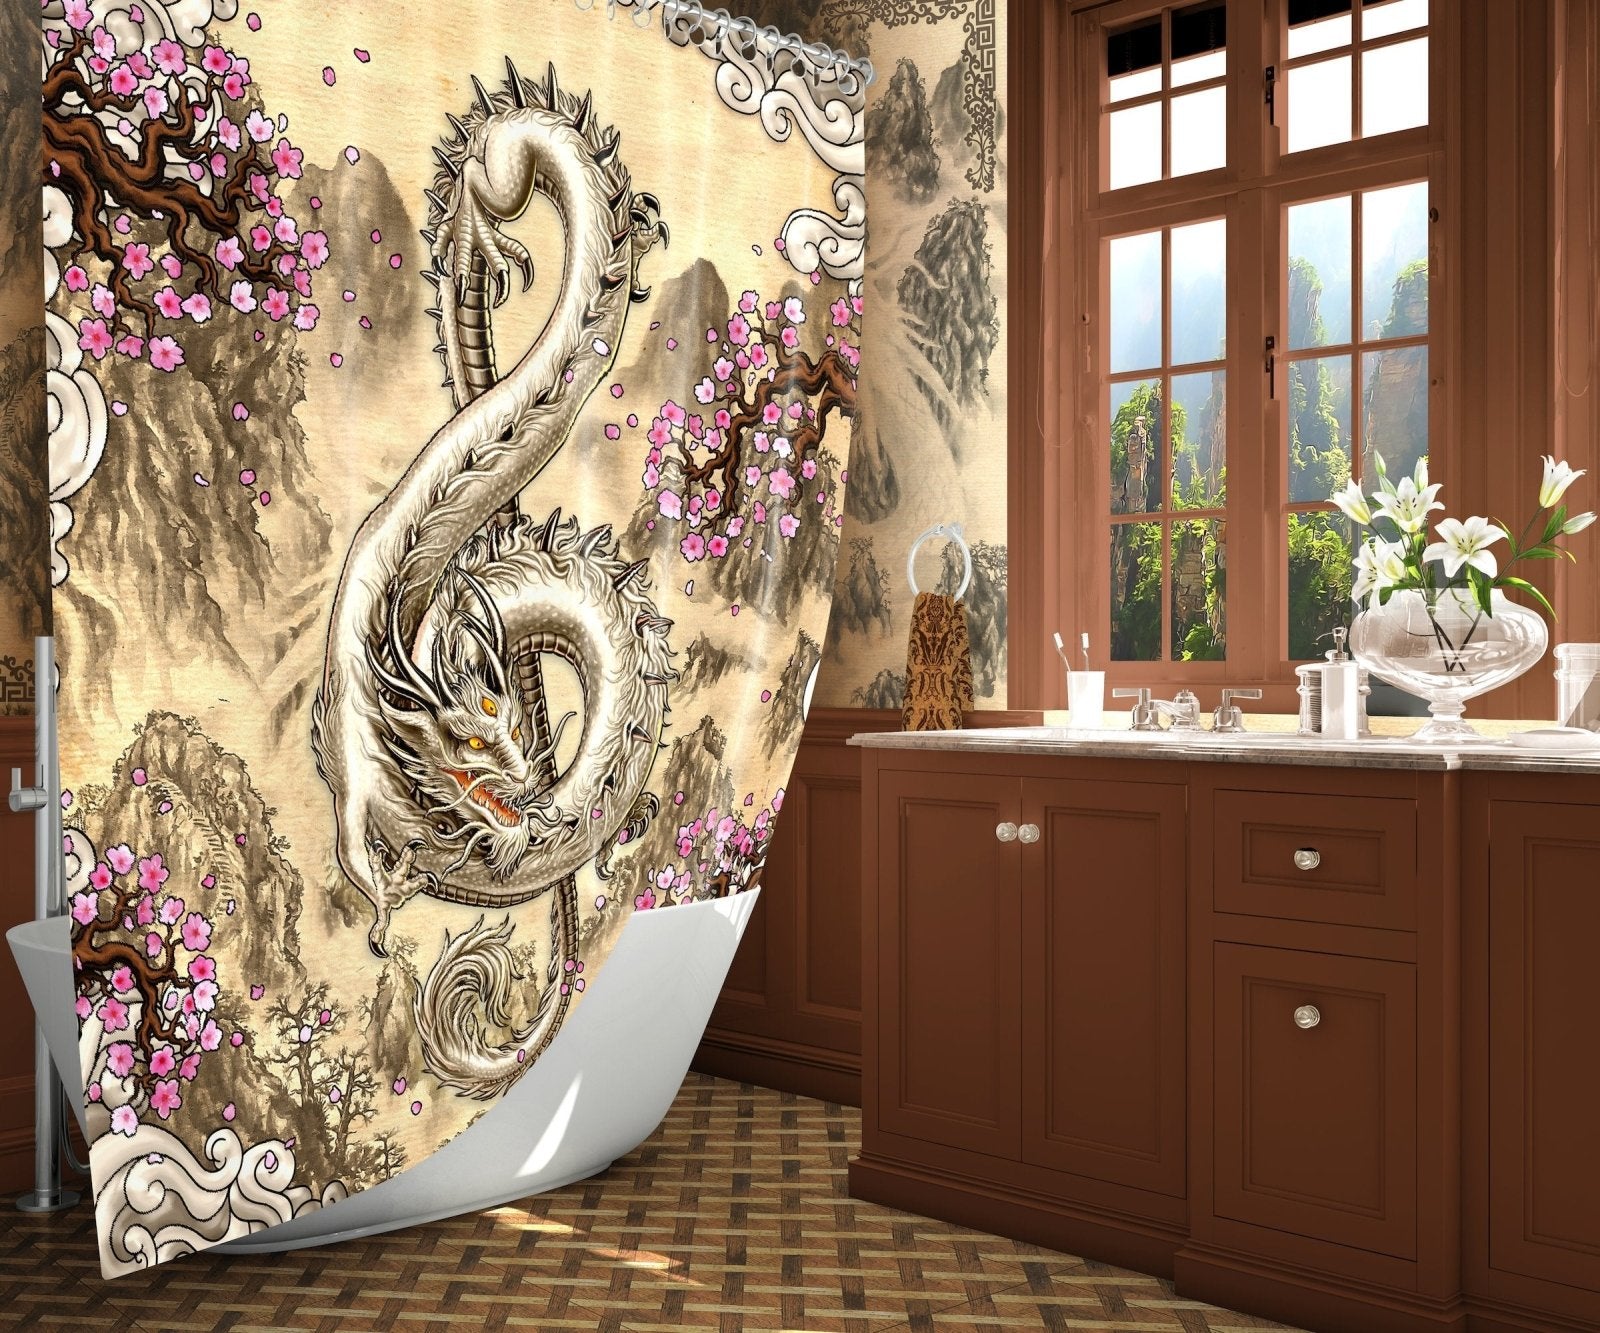 Chinese Dragon Shower Curtain, Fantasy and Indie Bathroom Decor, Treble Clef, Music Home Dragon, Eclectic and Funky Home - Asian Painting - Abysm Internal